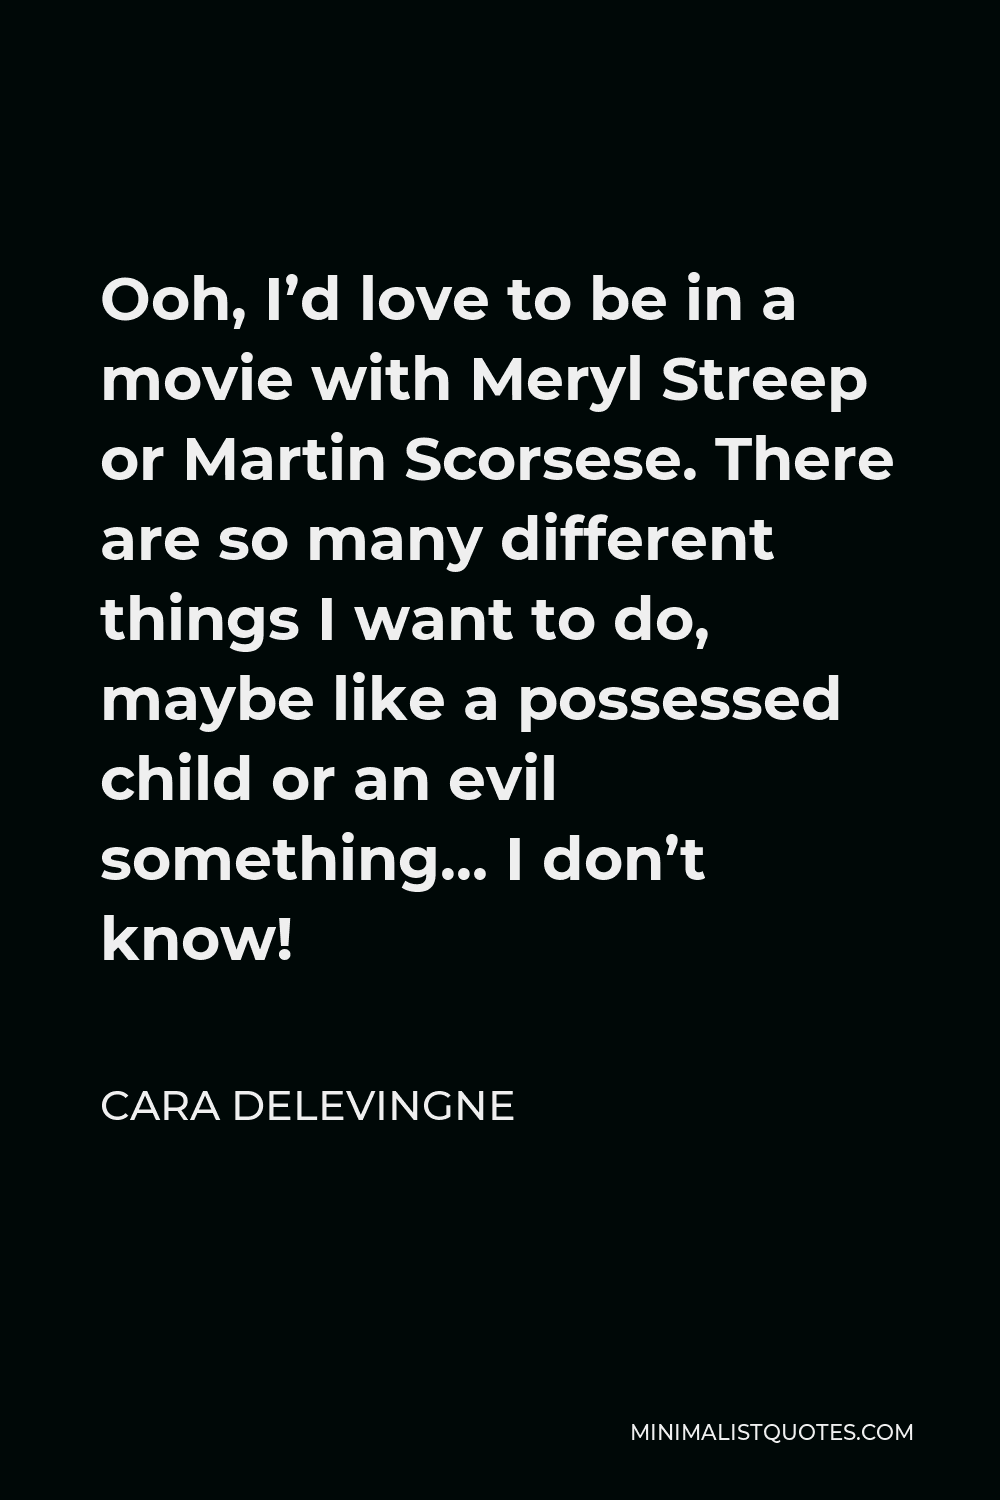 Cara Delevingne Quote - Ooh, I’d love to be in a movie with Meryl Streep or Martin Scorsese. There are so many different things I want to do, maybe like a possessed child or an evil something… I don’t know!